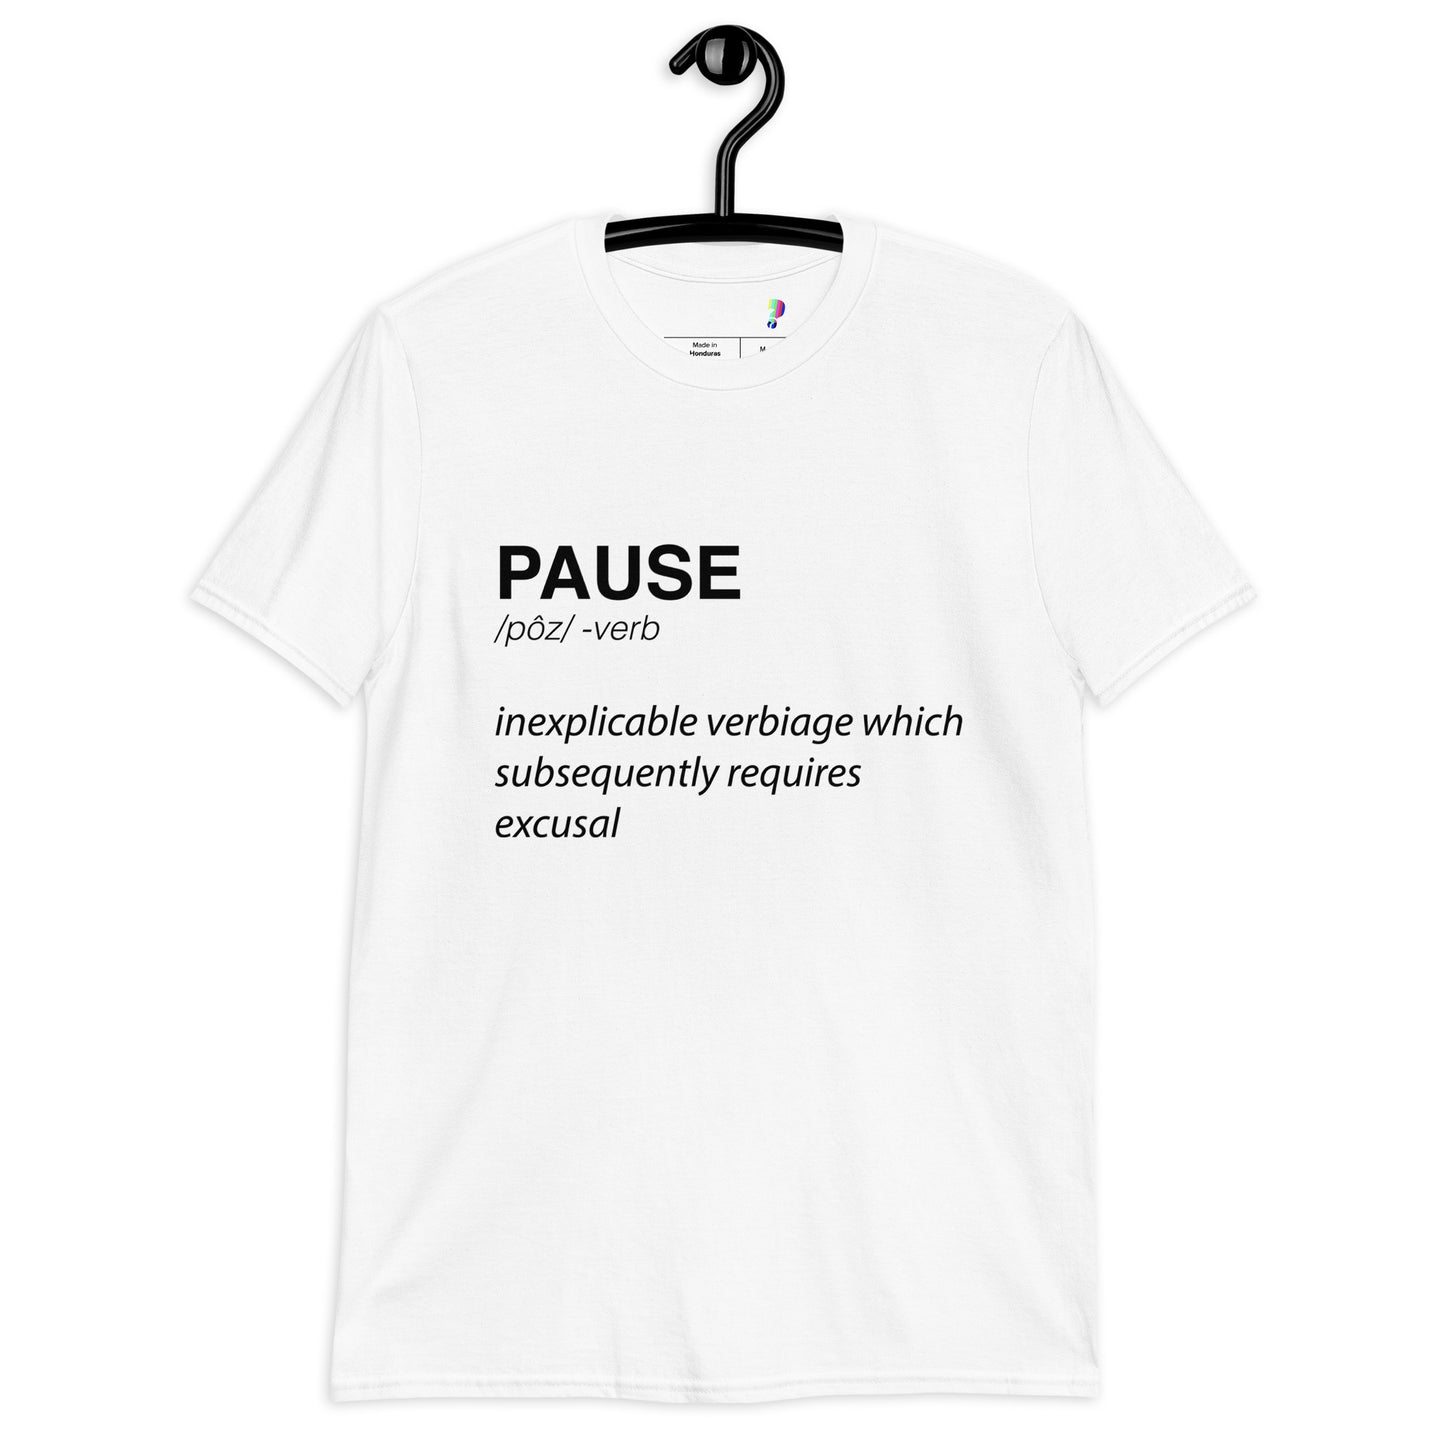 What You Thought ? - Definition Of Pause  T-Shirt